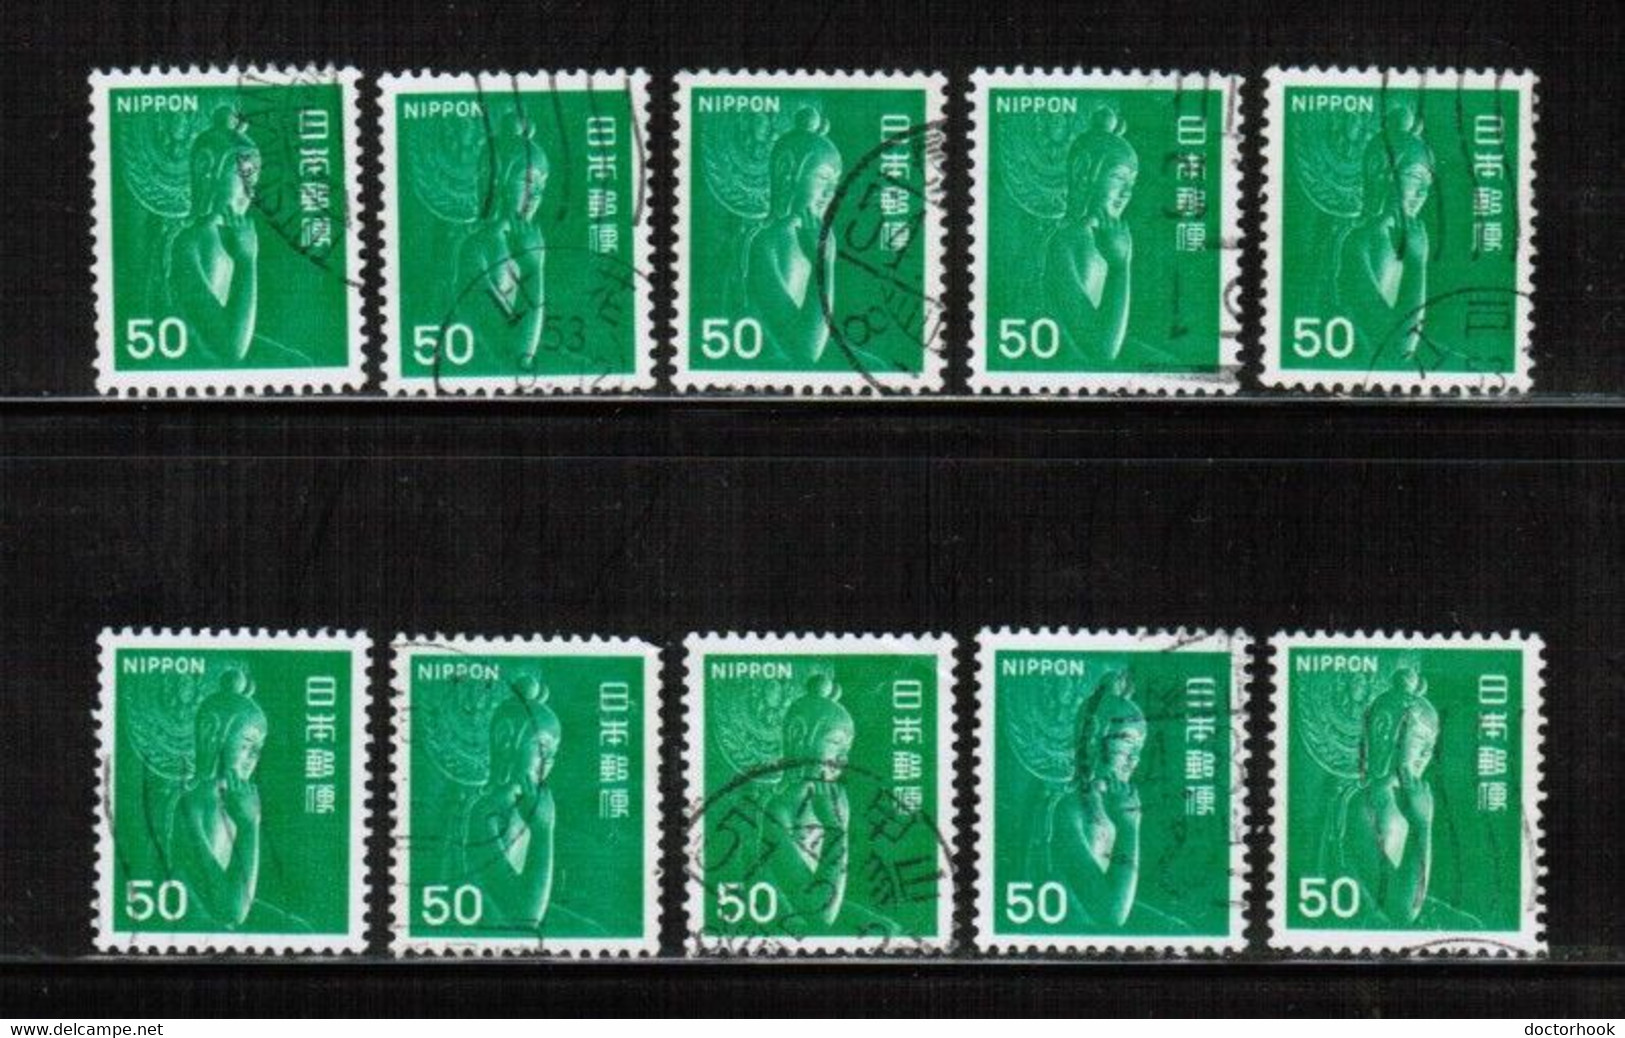 JAPAN   Scott # 1244 USED WHOLESALE LOT OF 10 (CONDITION AS PER SCAN) (WH-602) - Lots & Serien